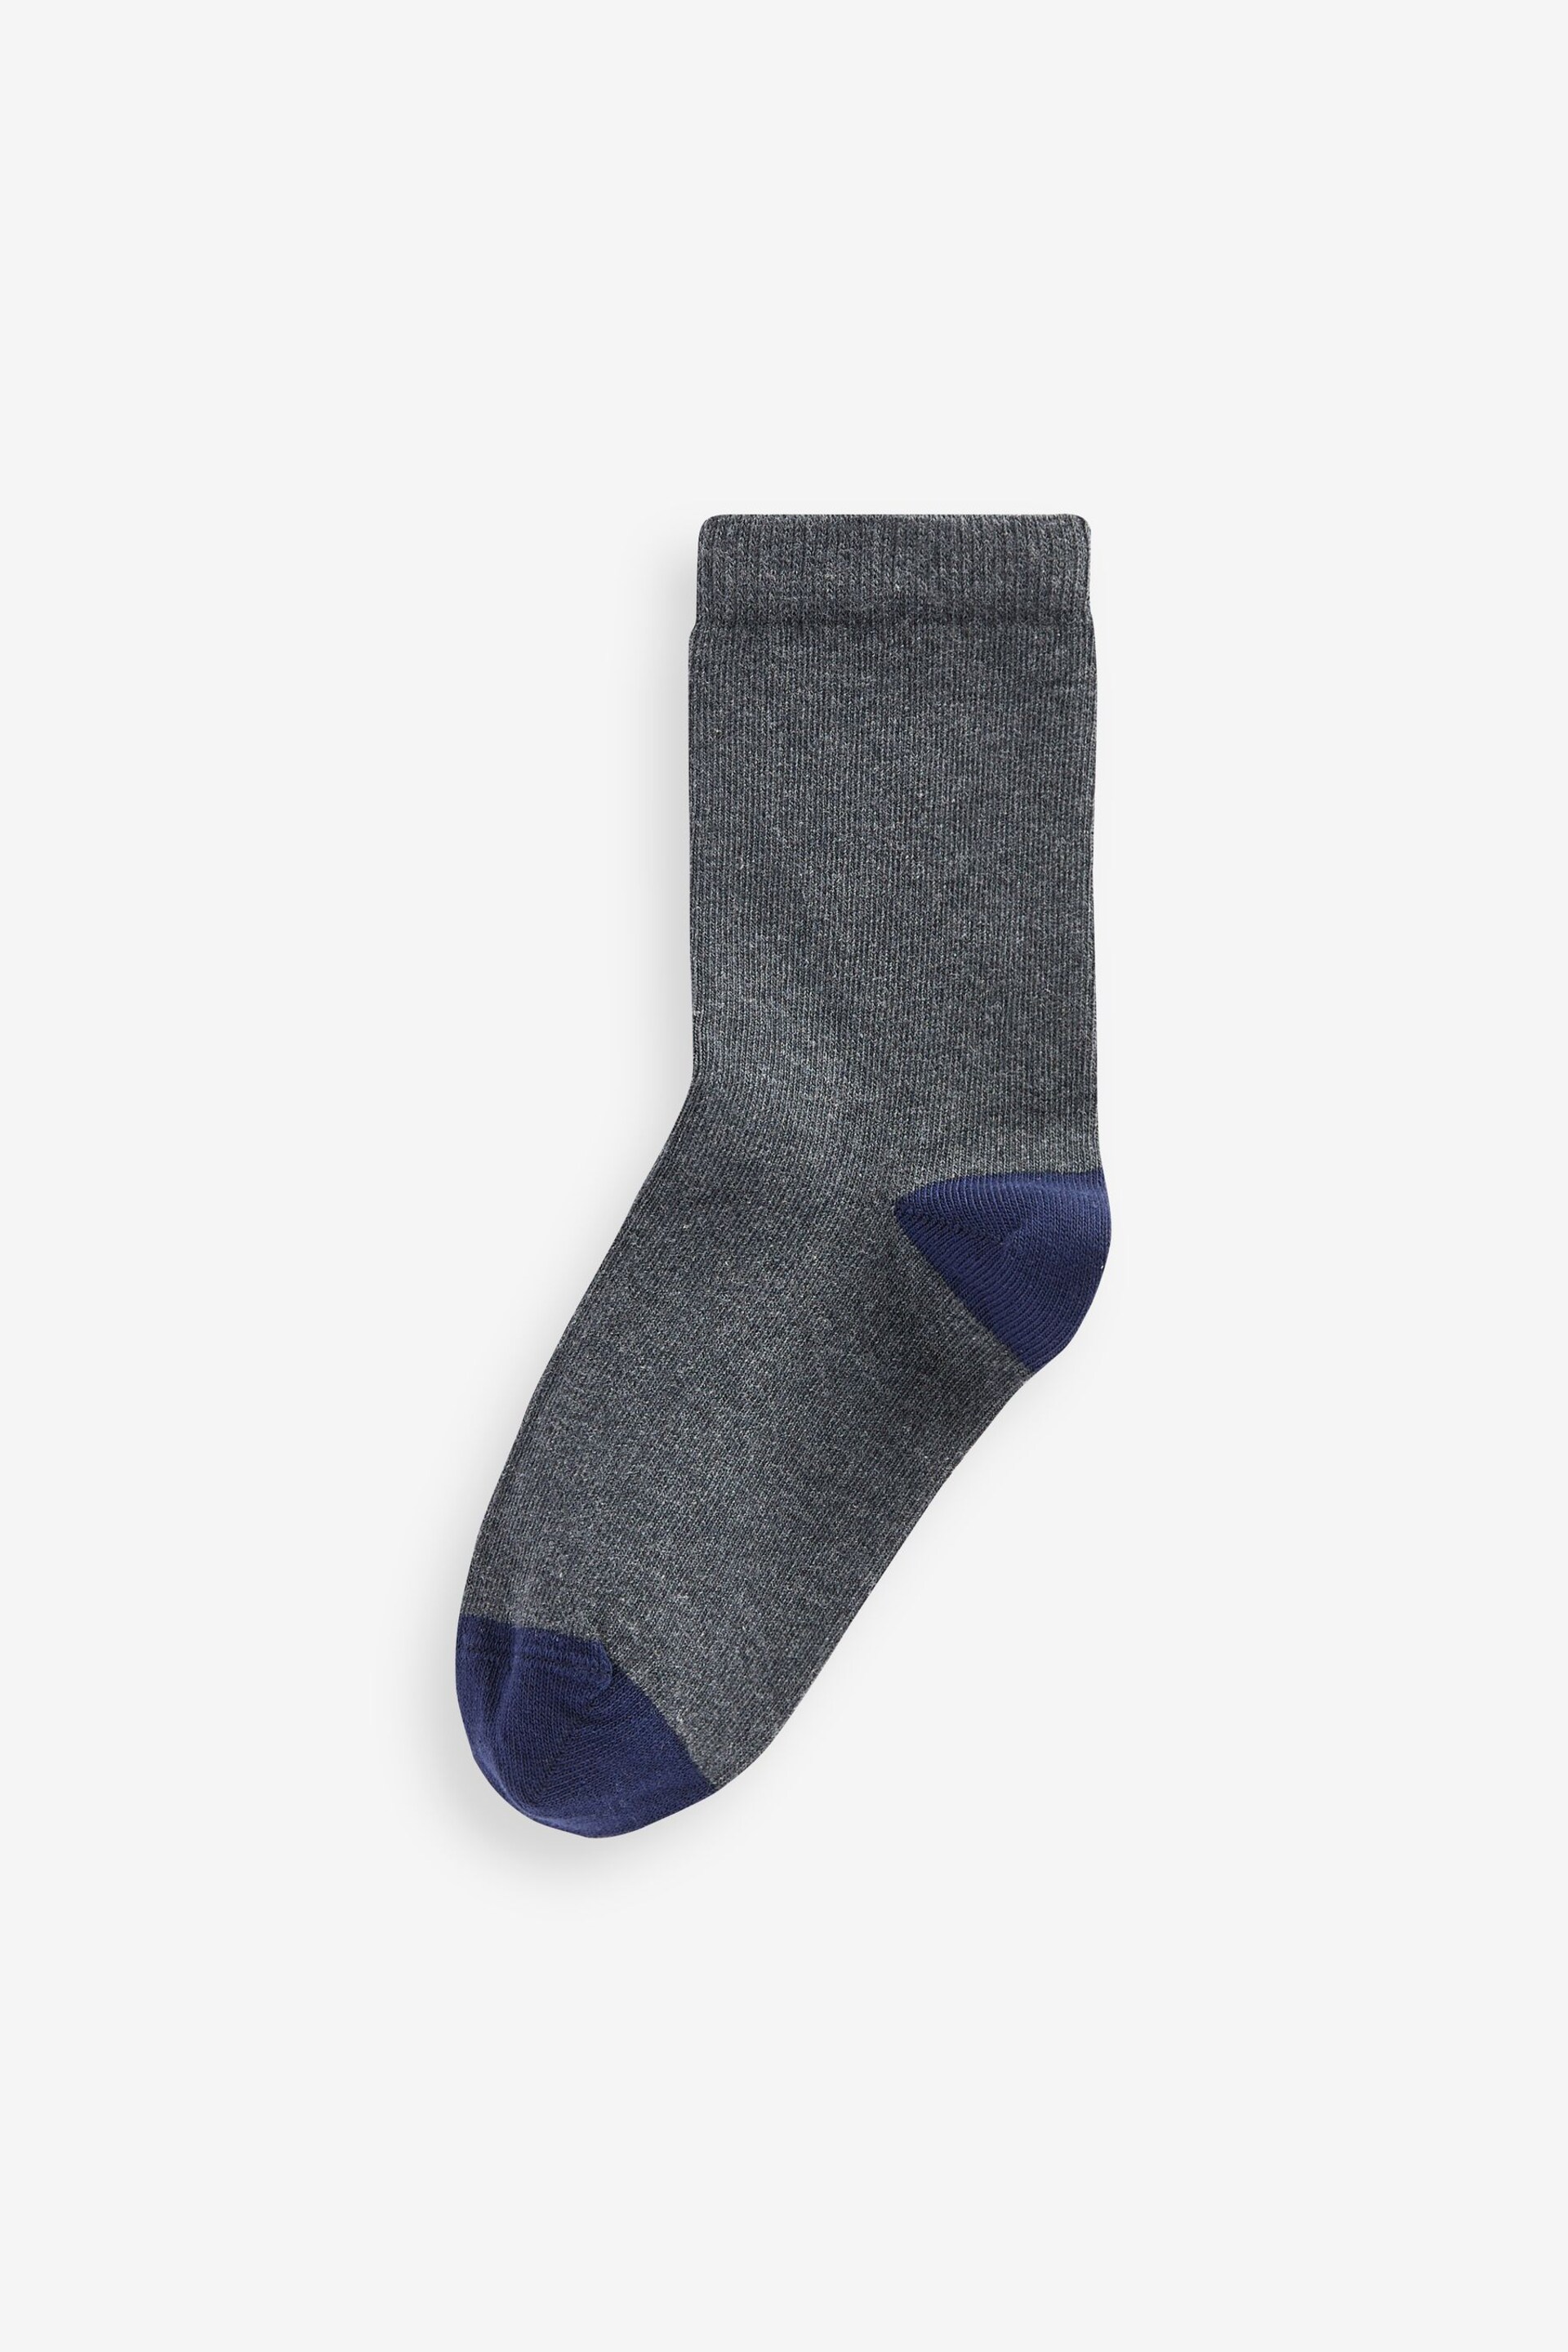 Grey with Contrast Heel and Toe Cotton Rich Socks 10 Pack - Image 7 of 11